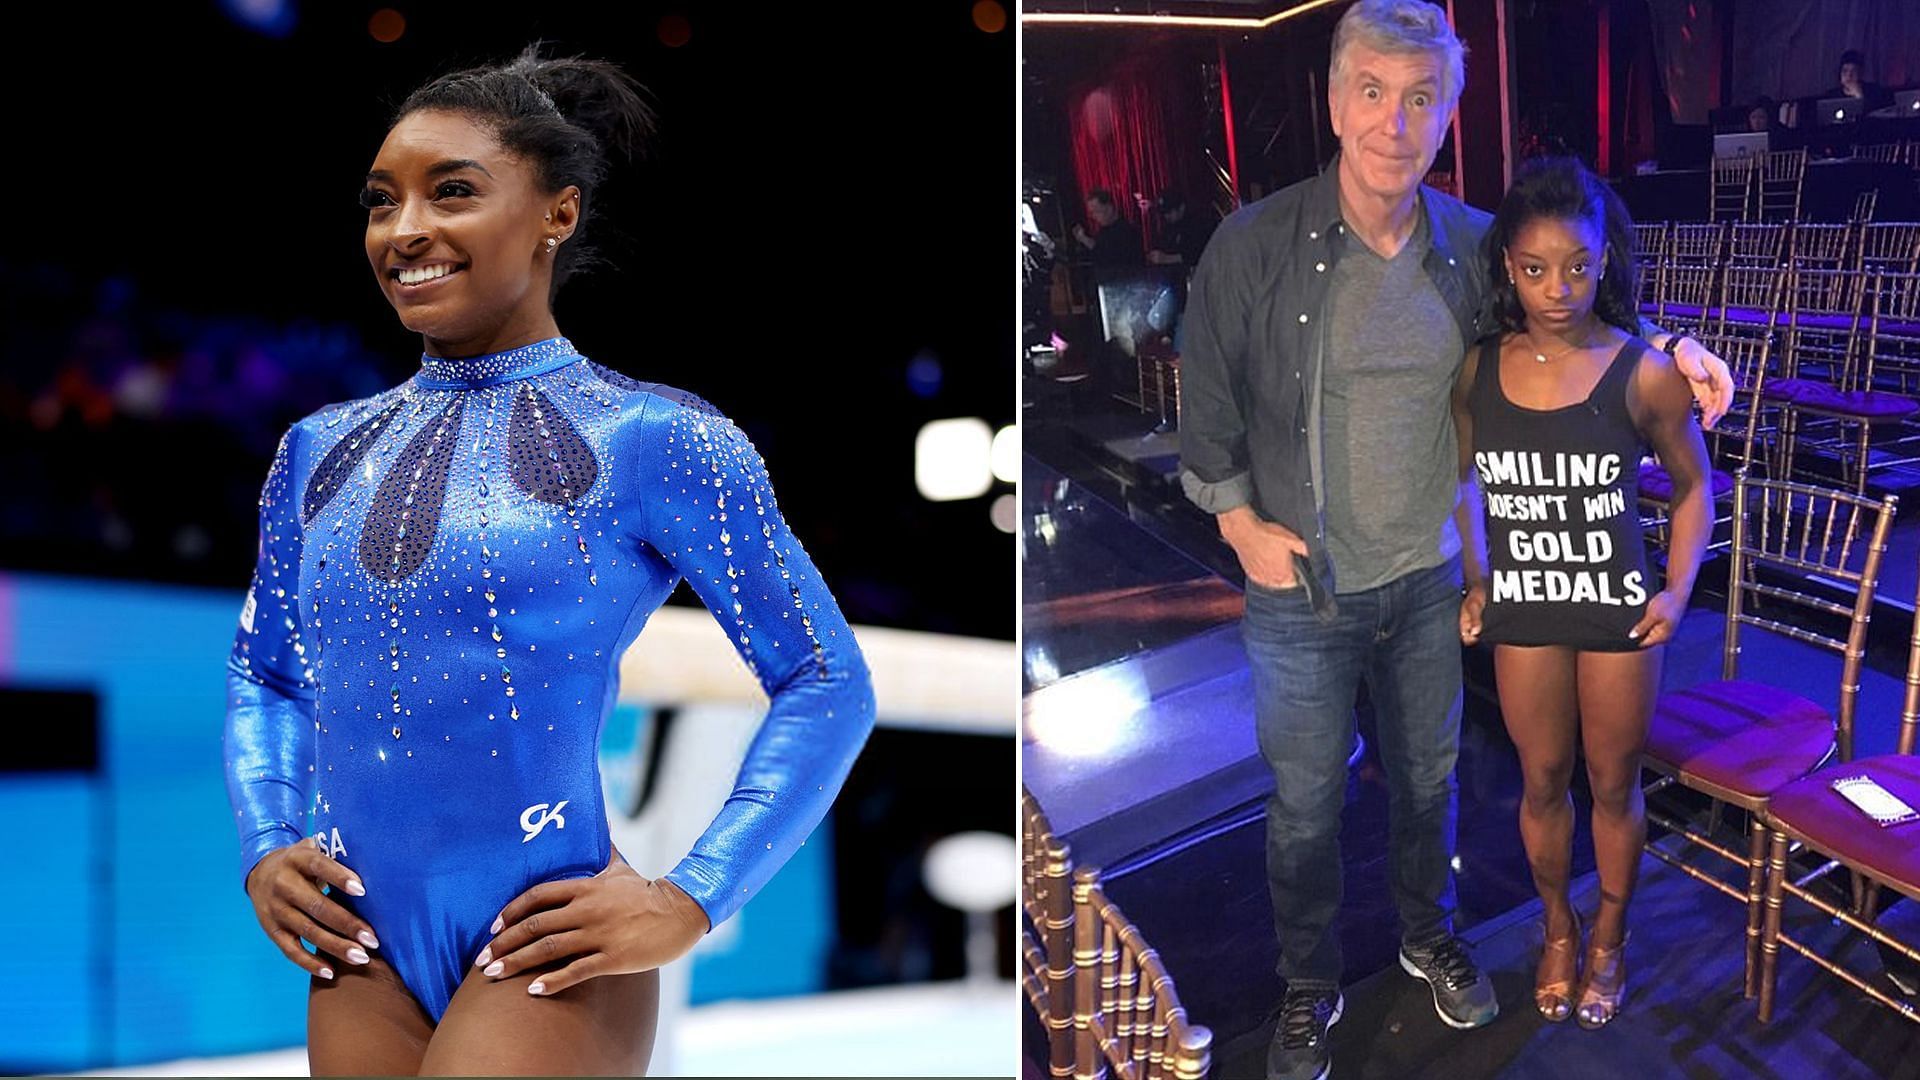 Simone Biles along with the former Dancing With The Stars host host Tom Bergeron